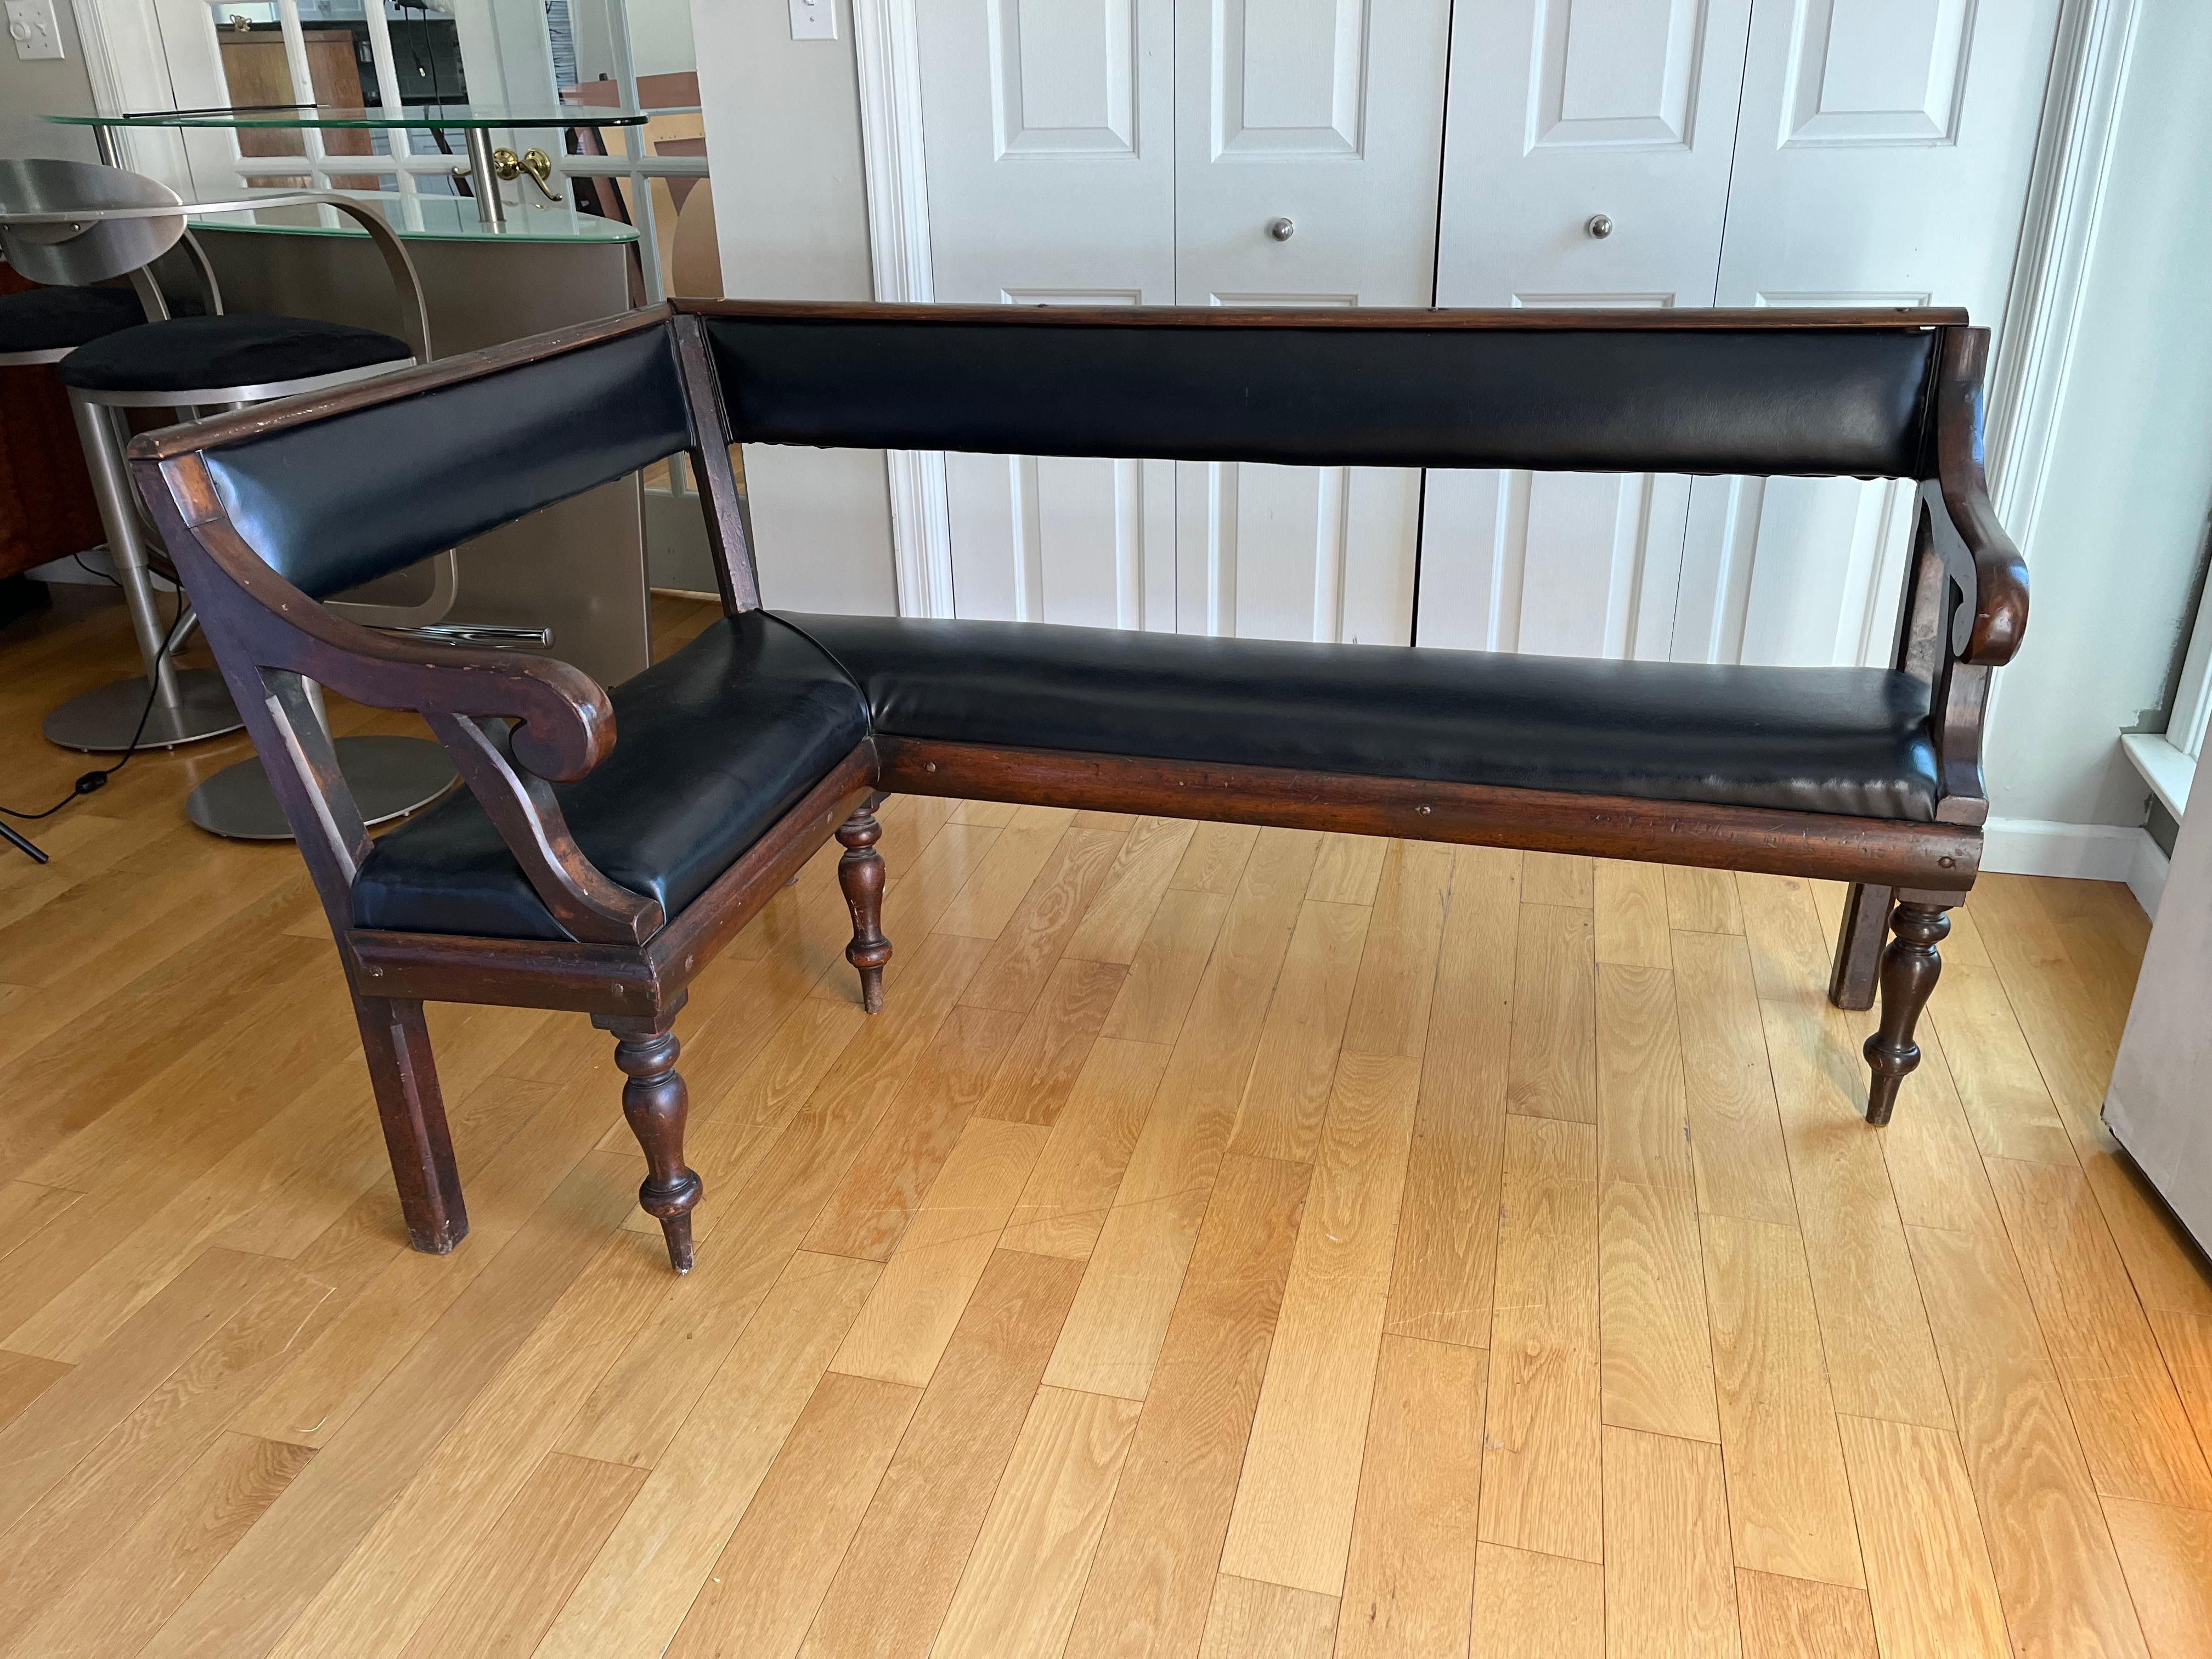 Victorian Vintage Leather Banquette/Bench, Early 1900s